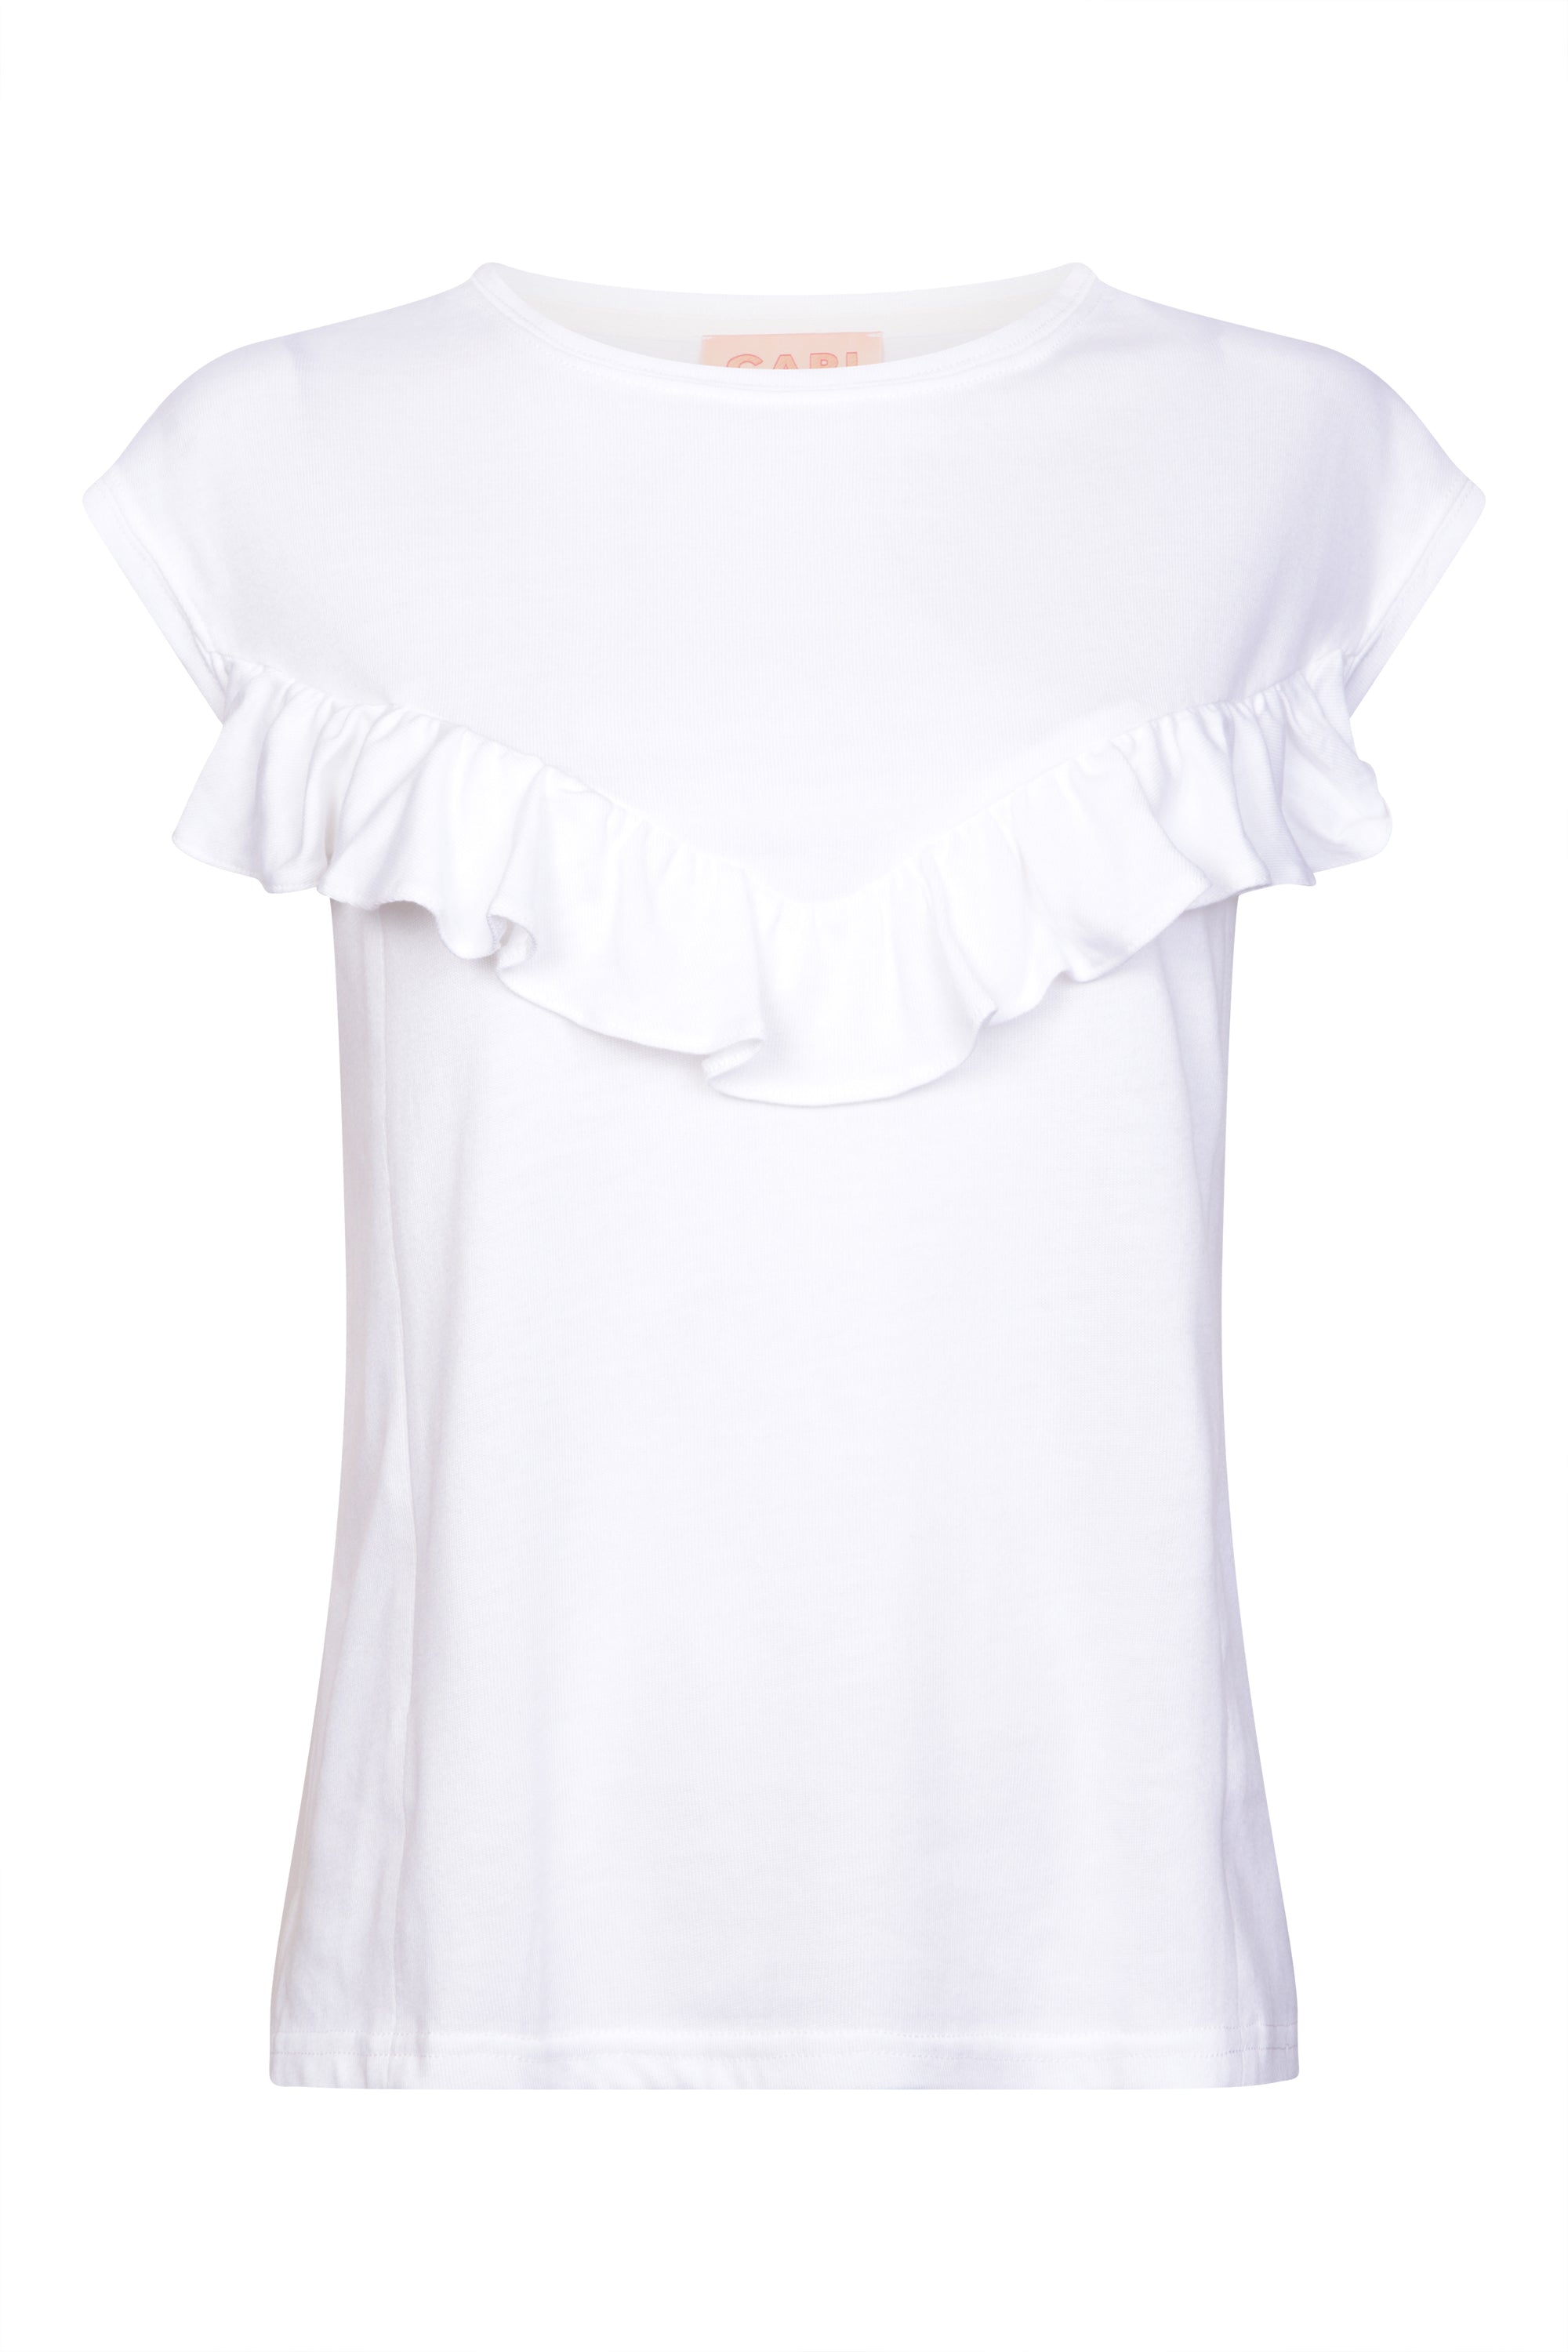 Breastfeeding top. Effortless everyday style and comfort with this white breastfeeding t-shirt. Designed for stress-free nursing on-the-go. Hidden zips sit under the ruffle, easily done one-handed makes it the perfect everyday top for new mums, and a must-have for your breastfeeding wardrobe. 